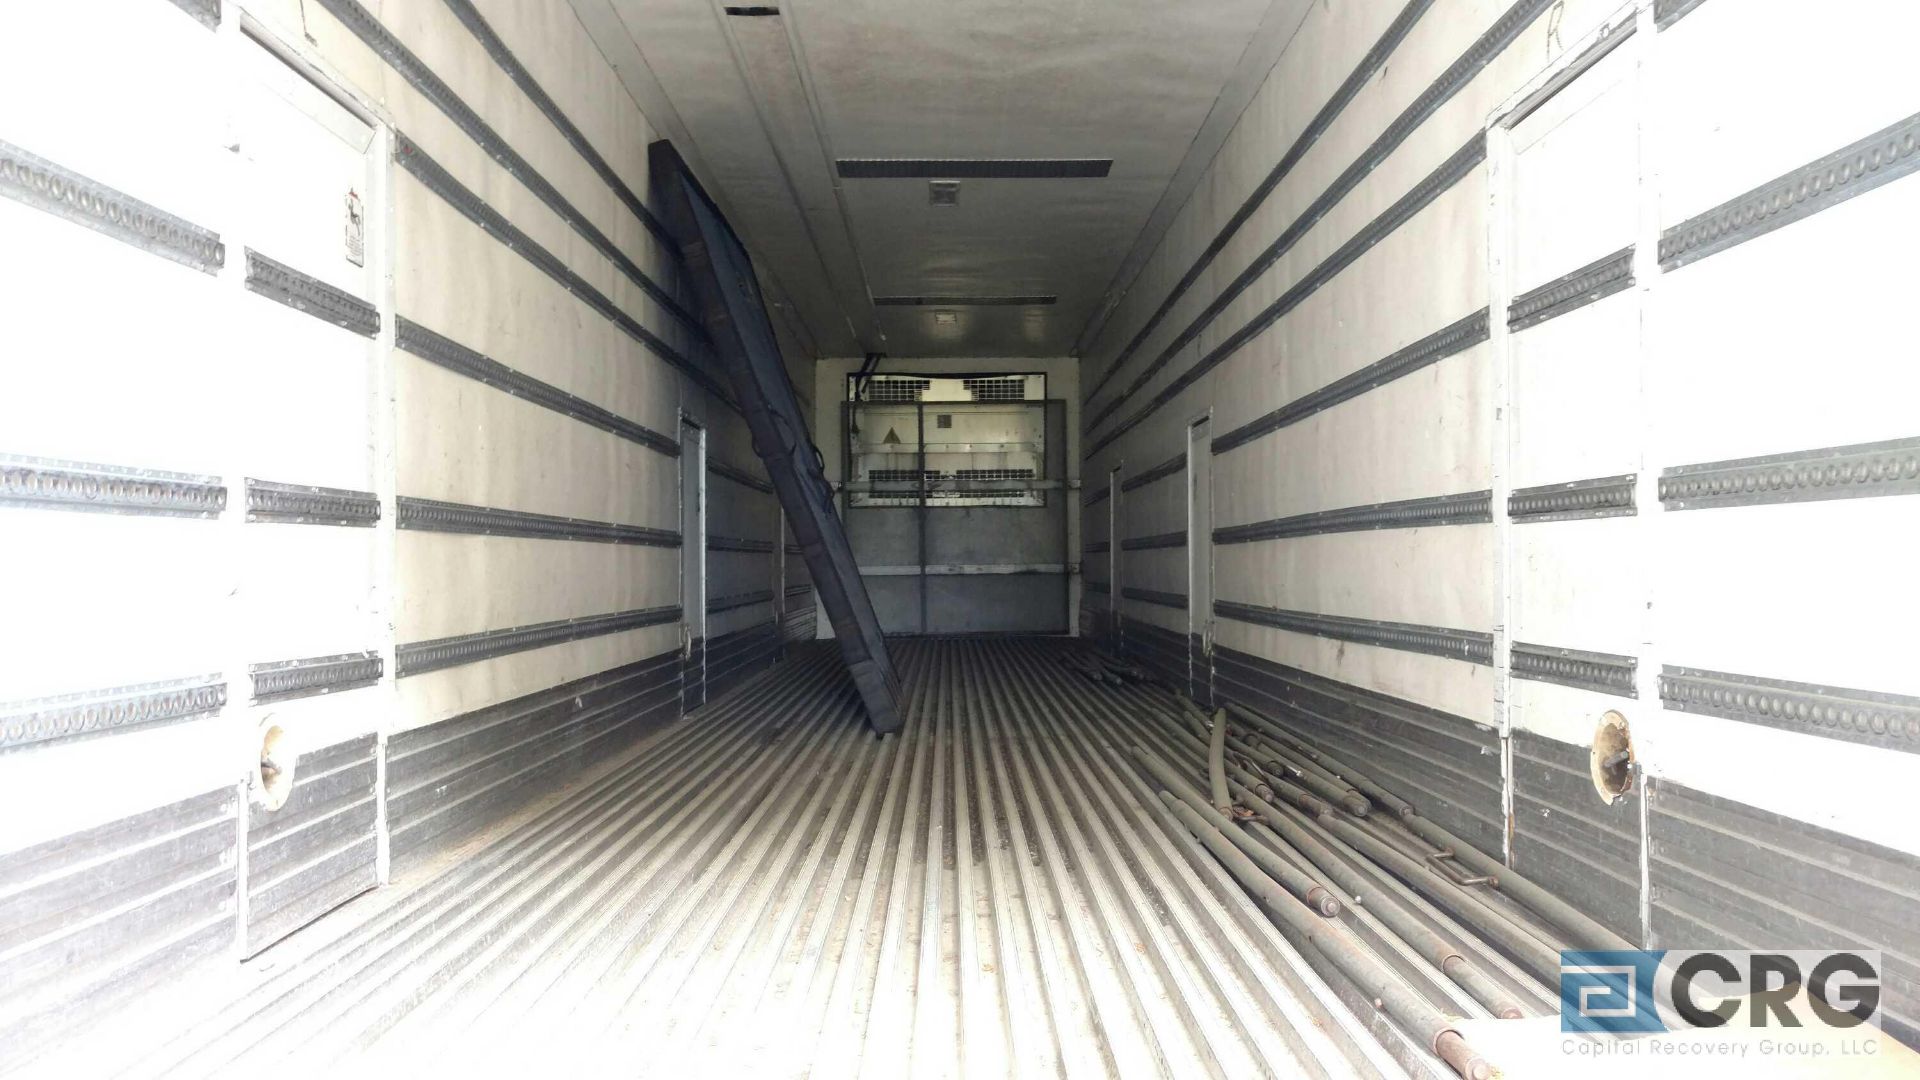 2004 Great Dane Multi Temp Refrigerated Semi Trailer - 42 Long, 96" wide, Carrier Stealth, 17506 - Image 6 of 6